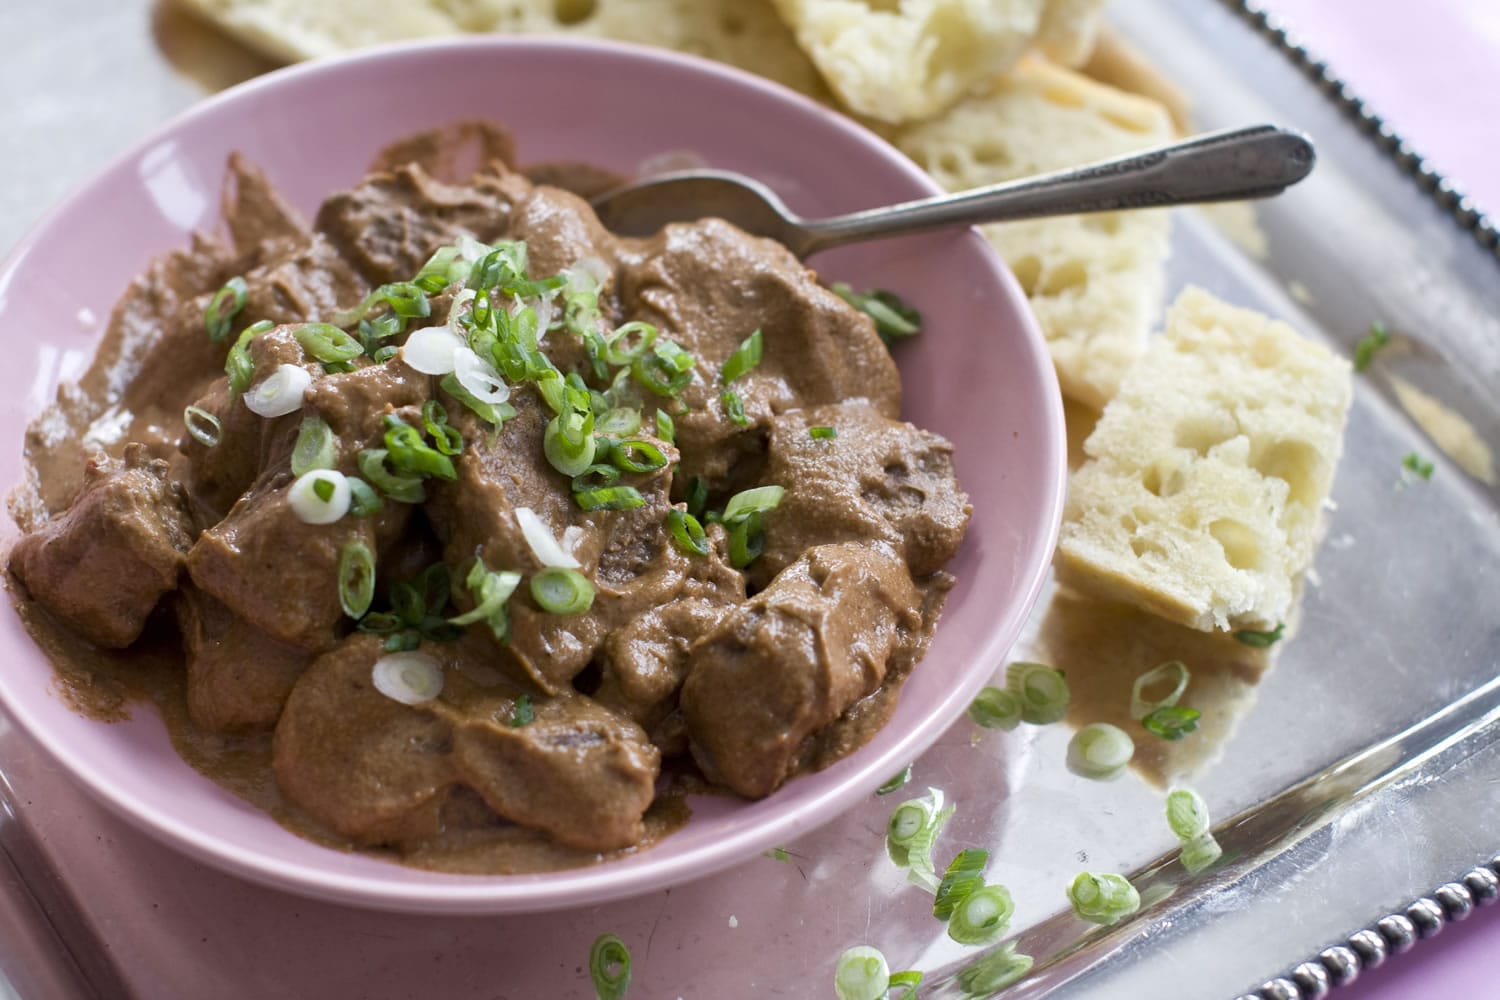 Think a little outside the chocolate box this year with Beef Mole with a Buttery Baguette.